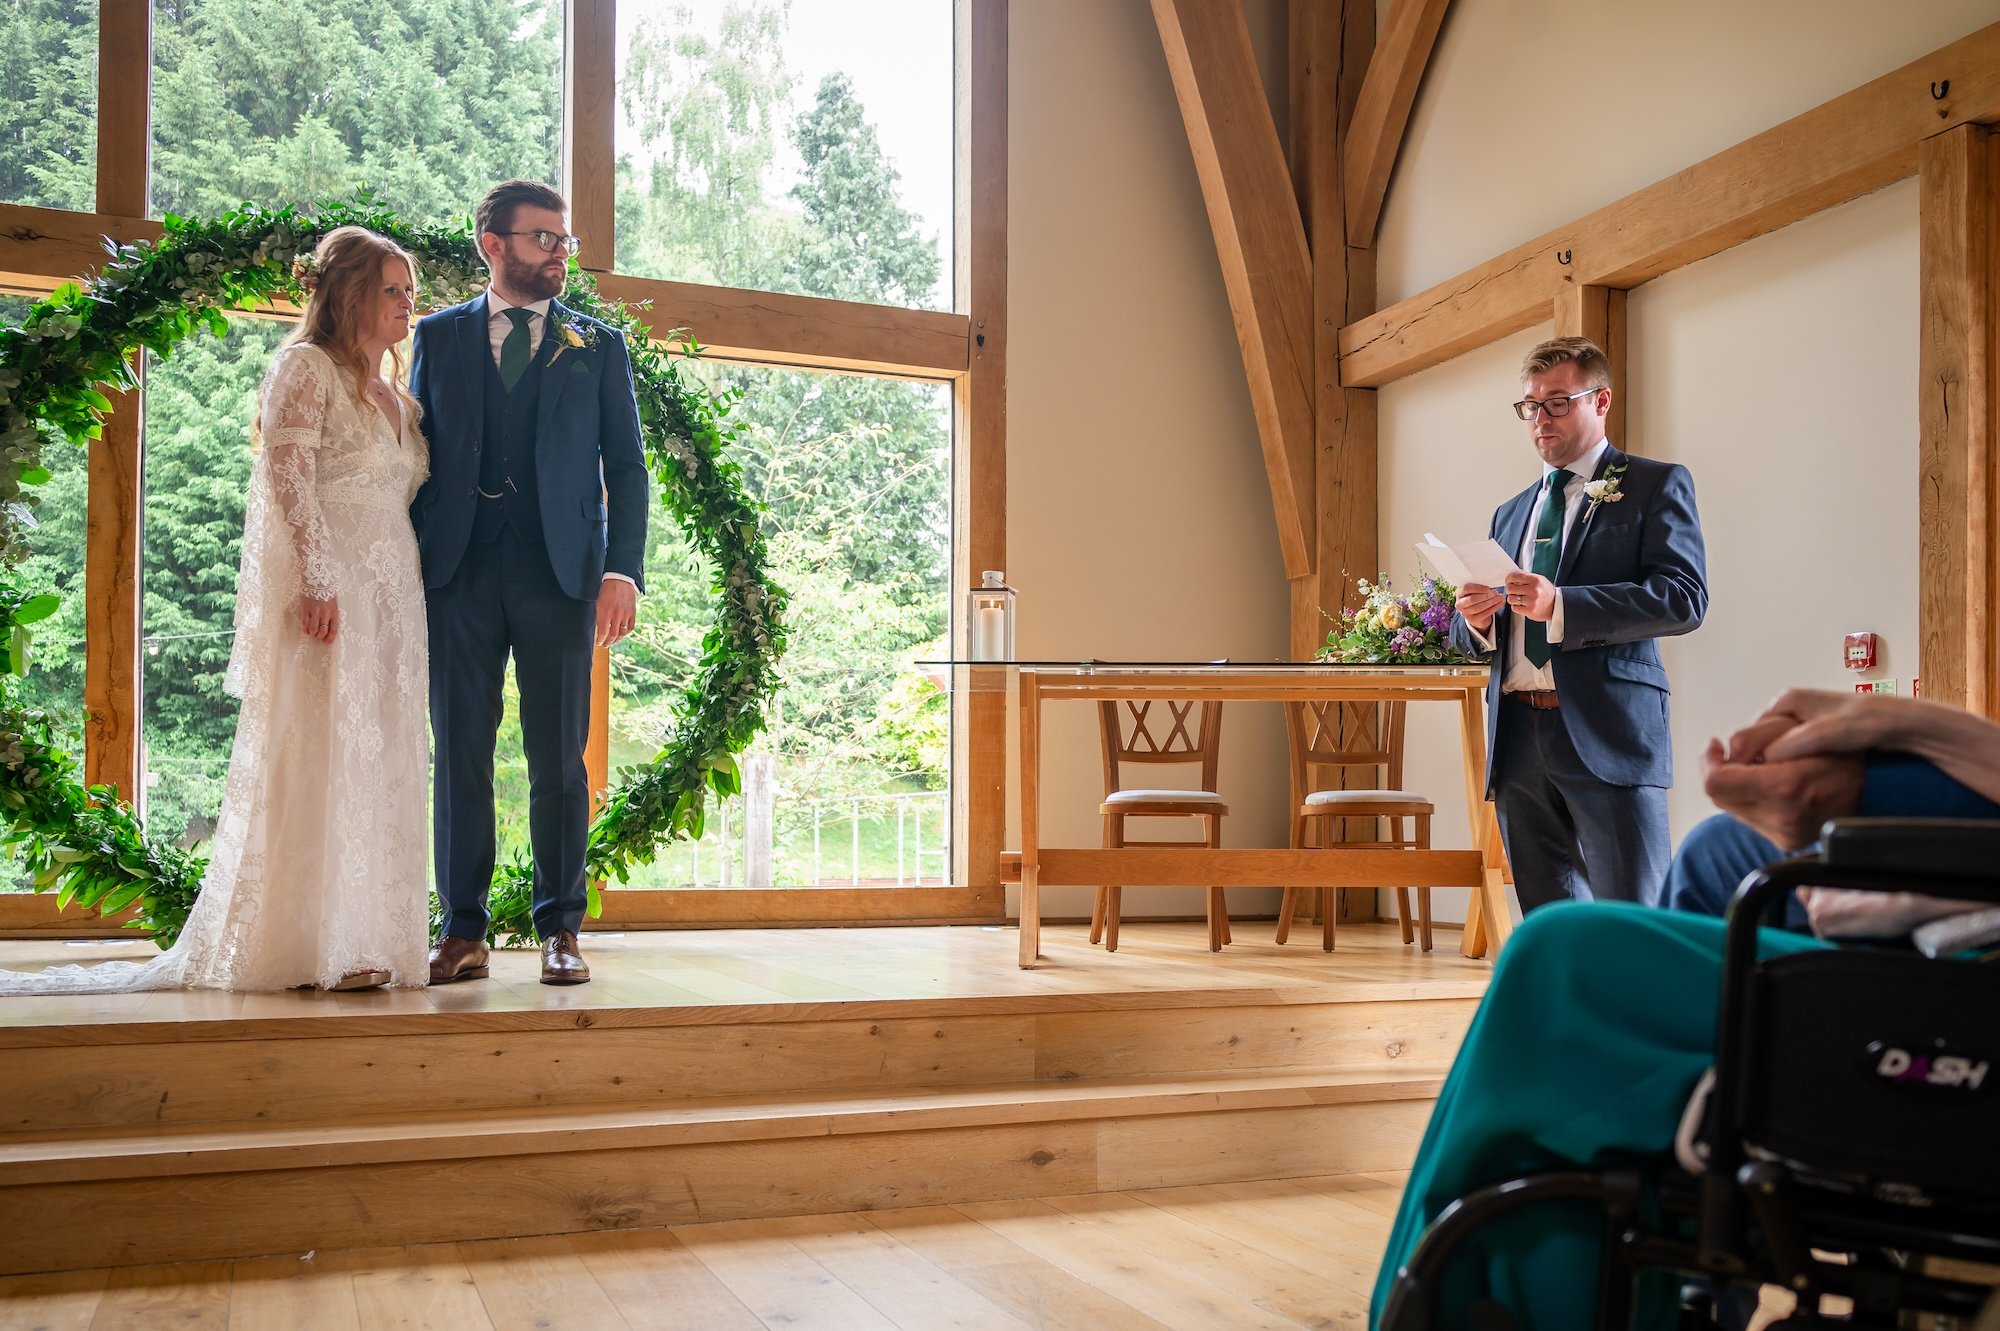 Guest gives a reading on the ceremony room at The Mill Barns Wedding Venue